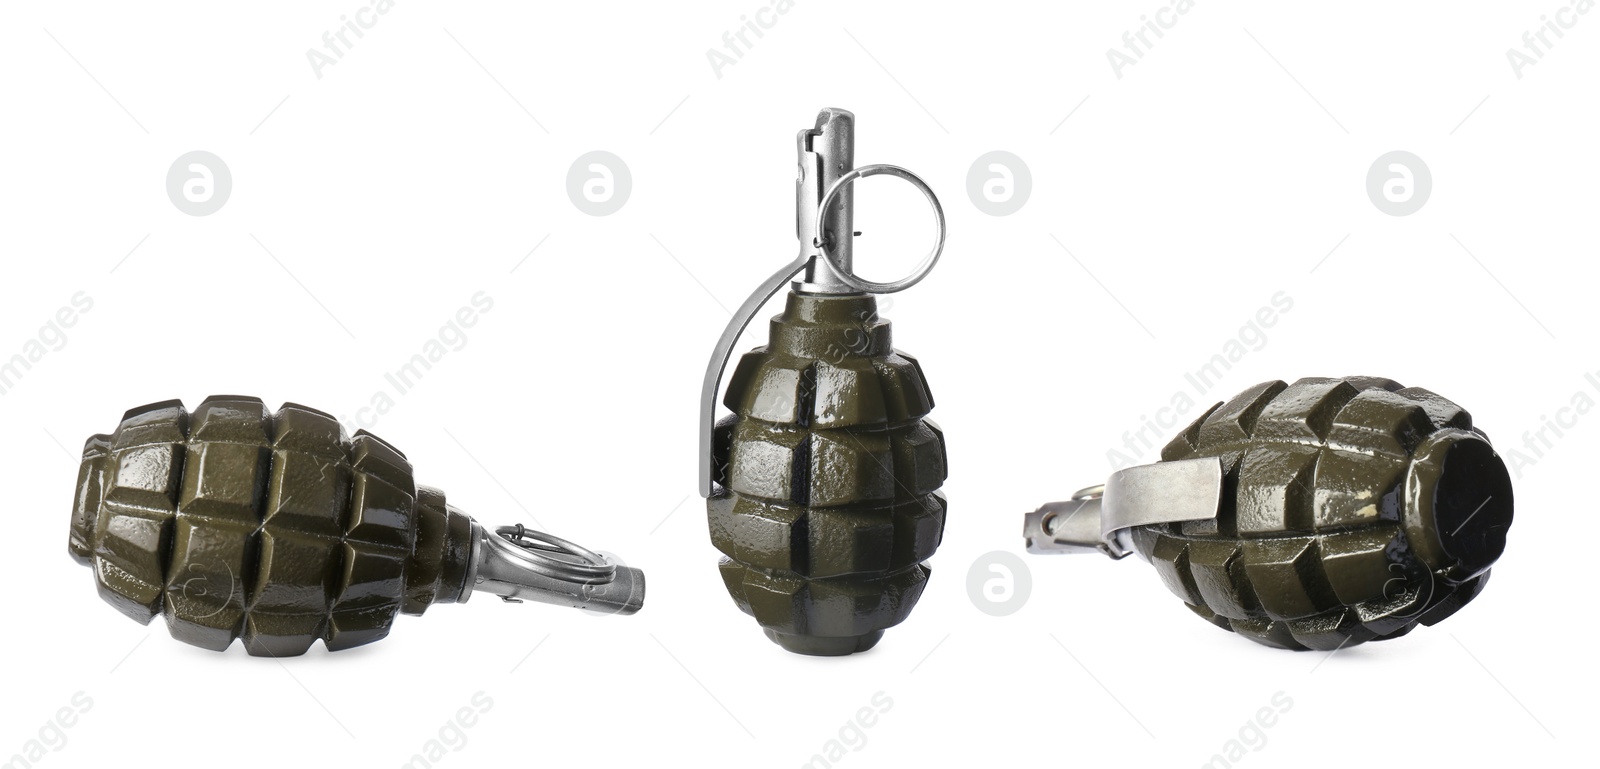 Image of Set with hand grenades on white background. Banner design